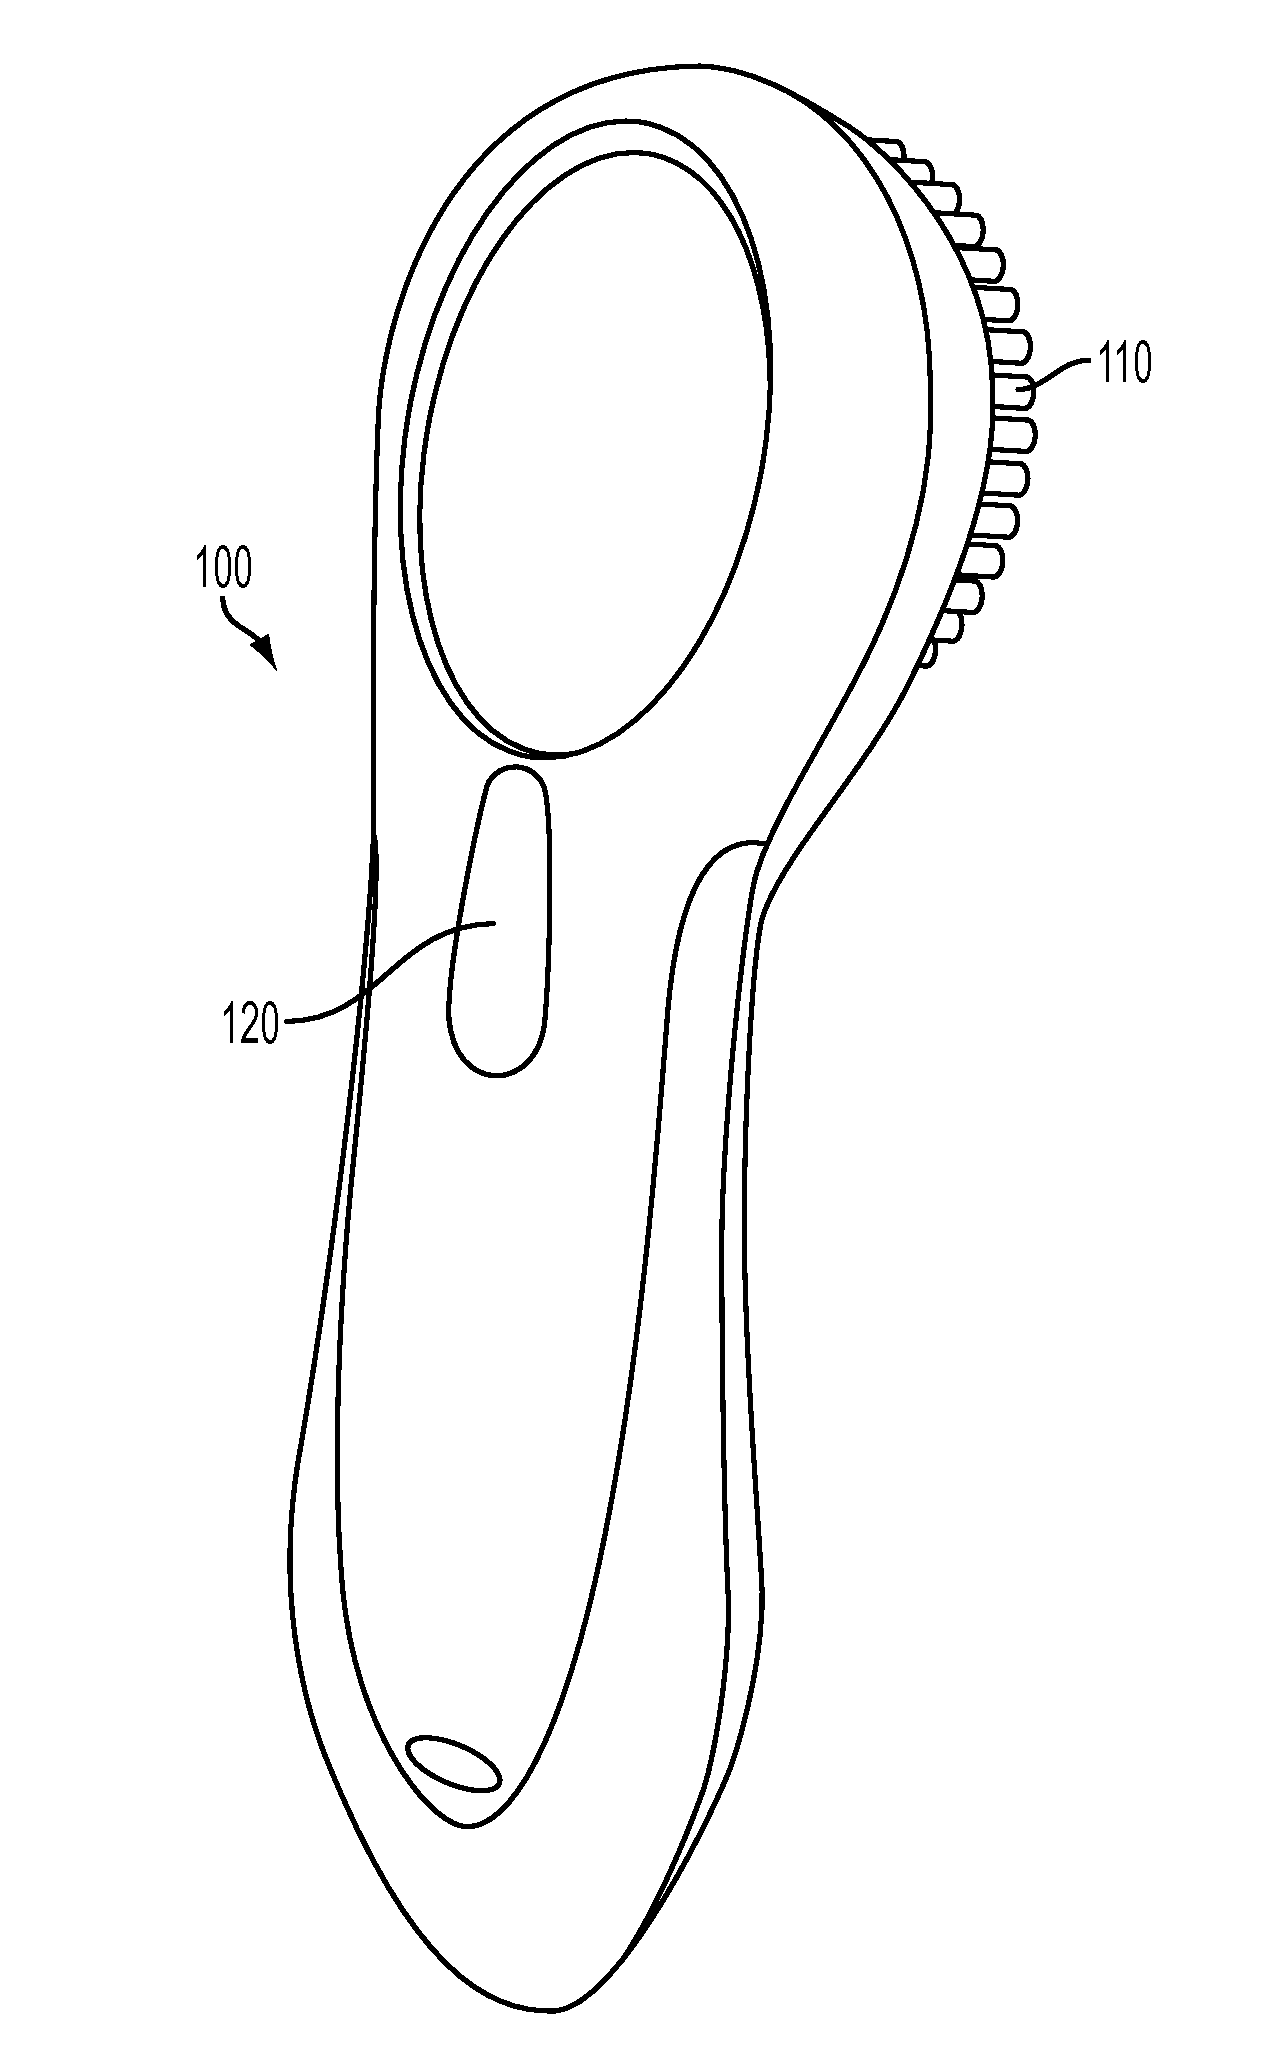 Skin treatment device and system